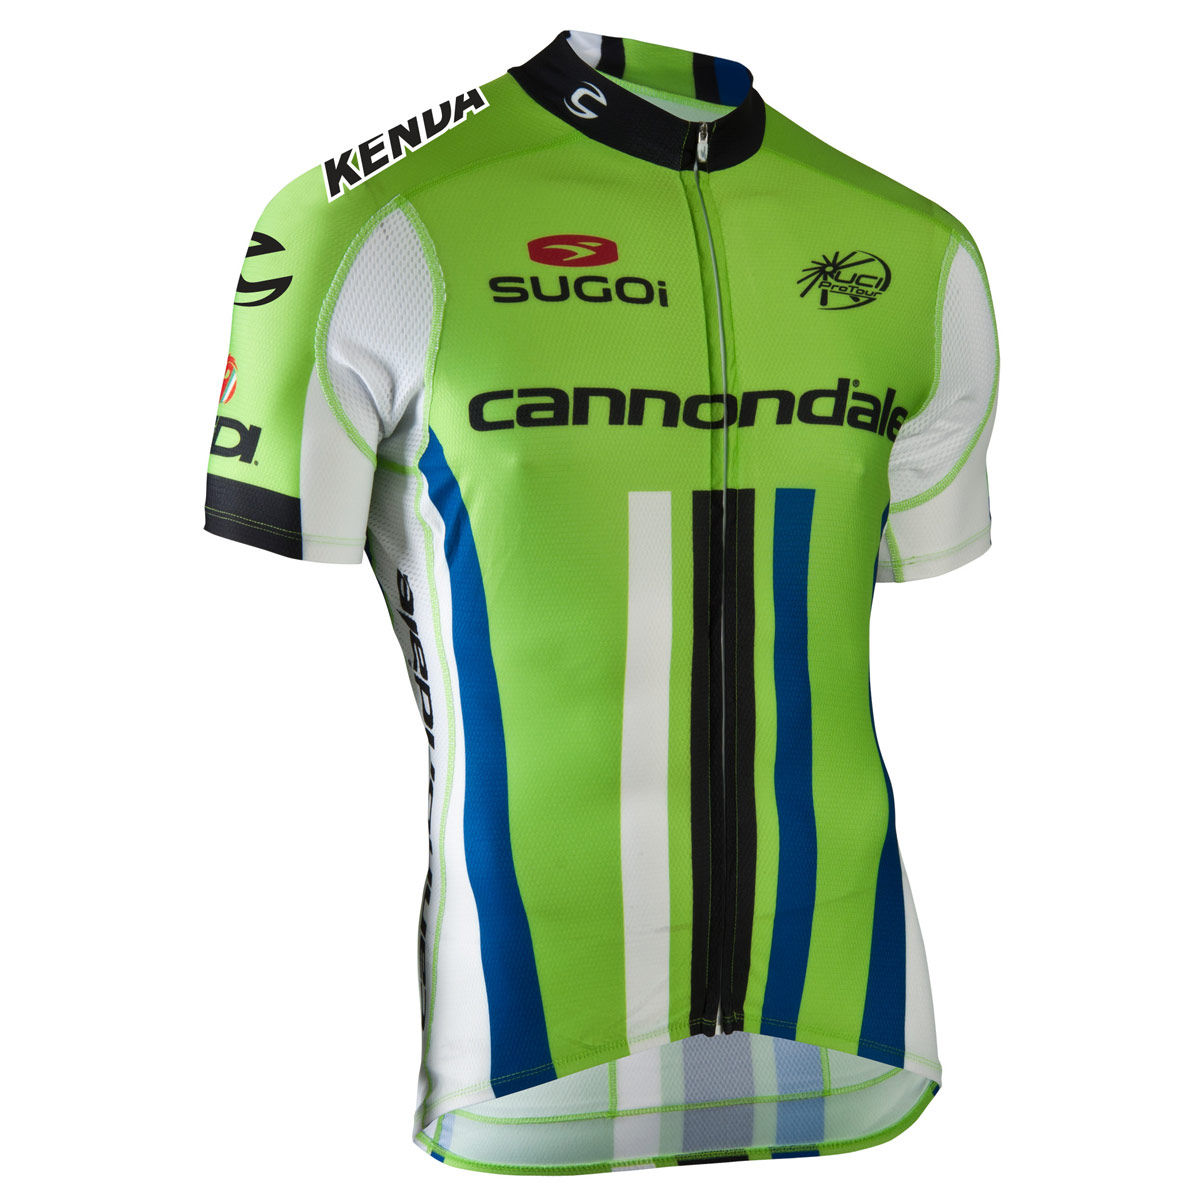 Cannondale-pro-cycling-jersey-green_2013